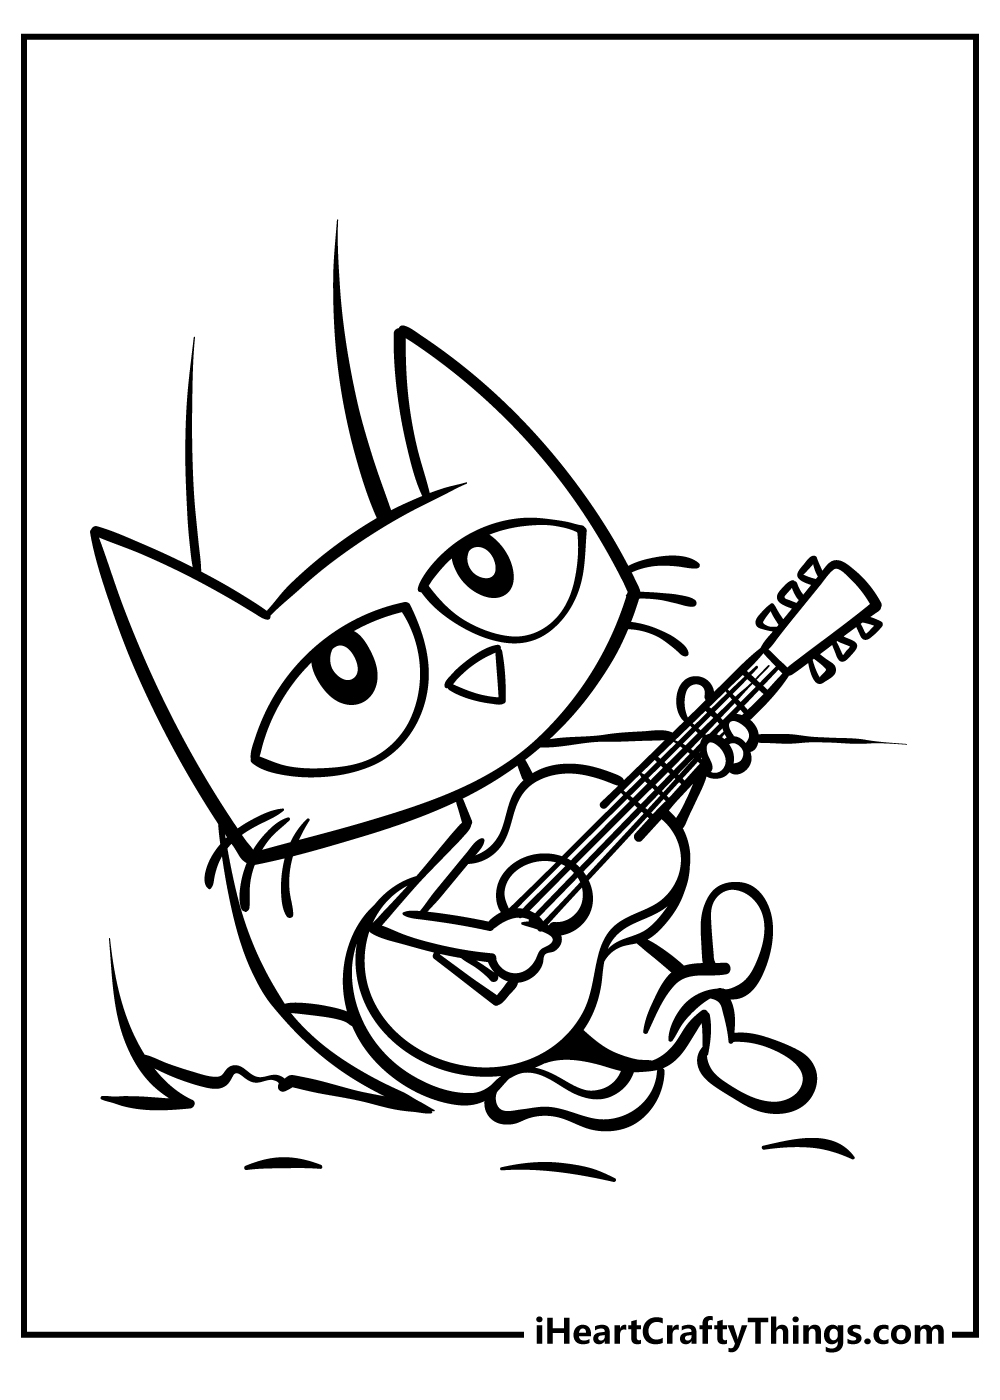 Pete The Cat Coloring Pages free pdf download